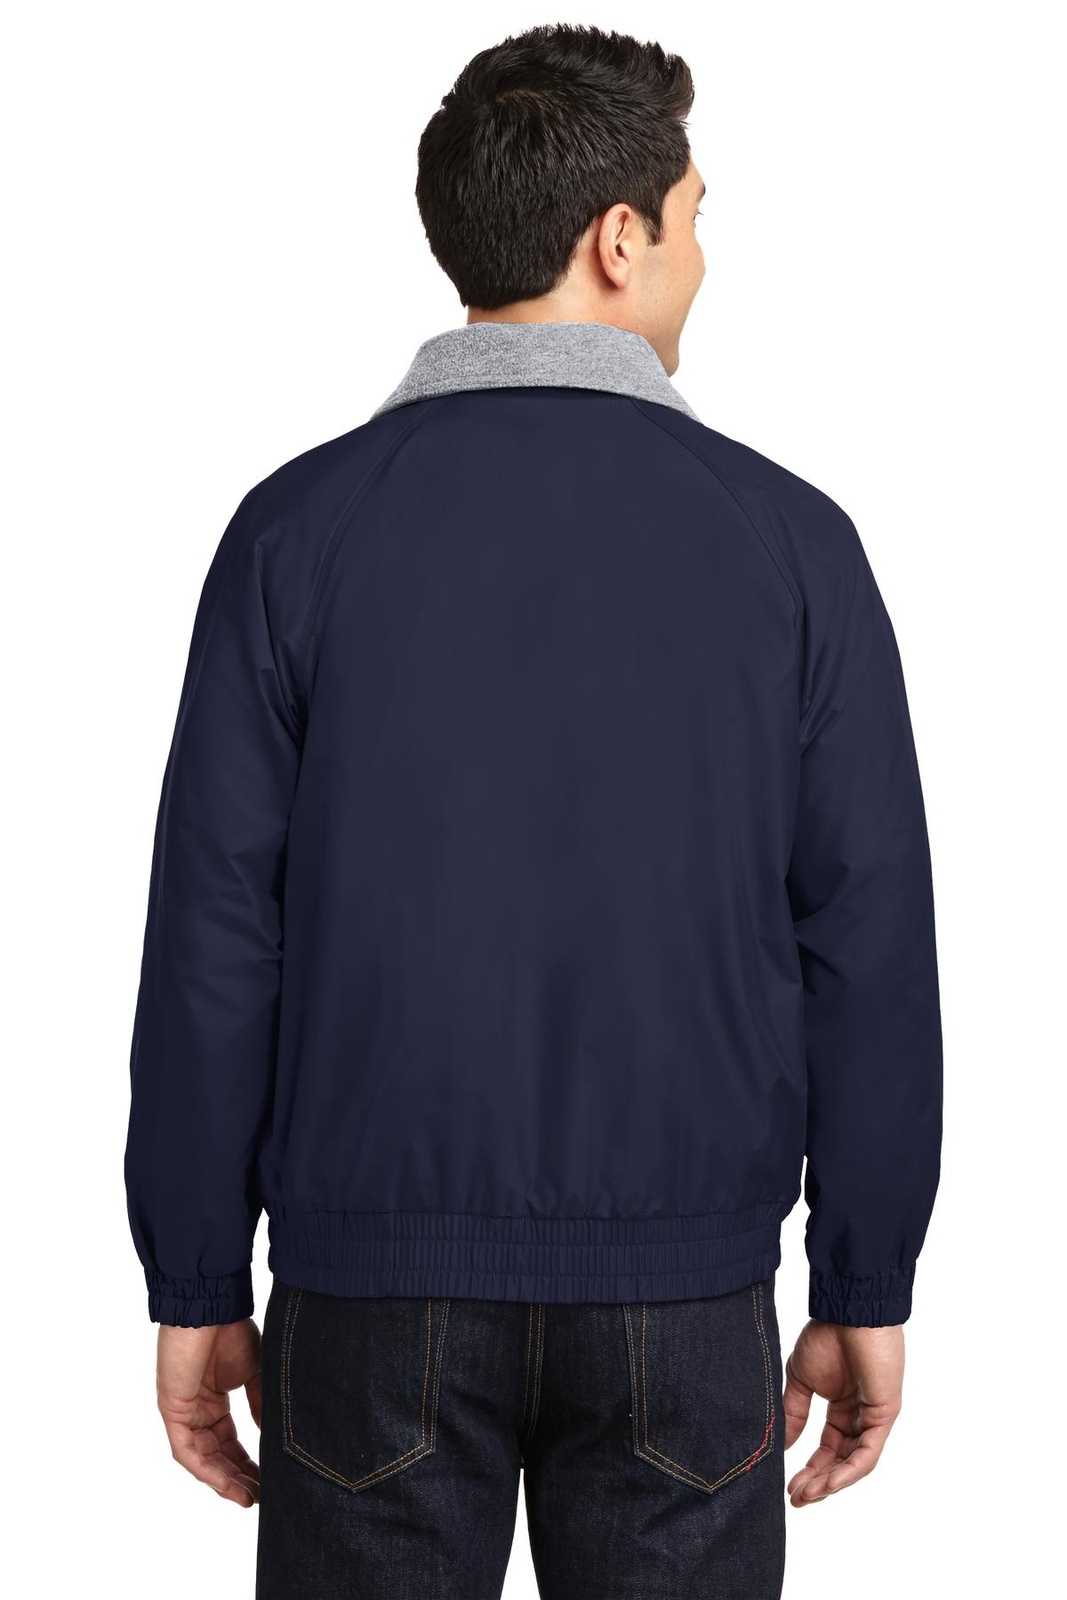 Port Authority JP54 Competitor Jacket - True Navy Gray Heather - HIT a Double - 2